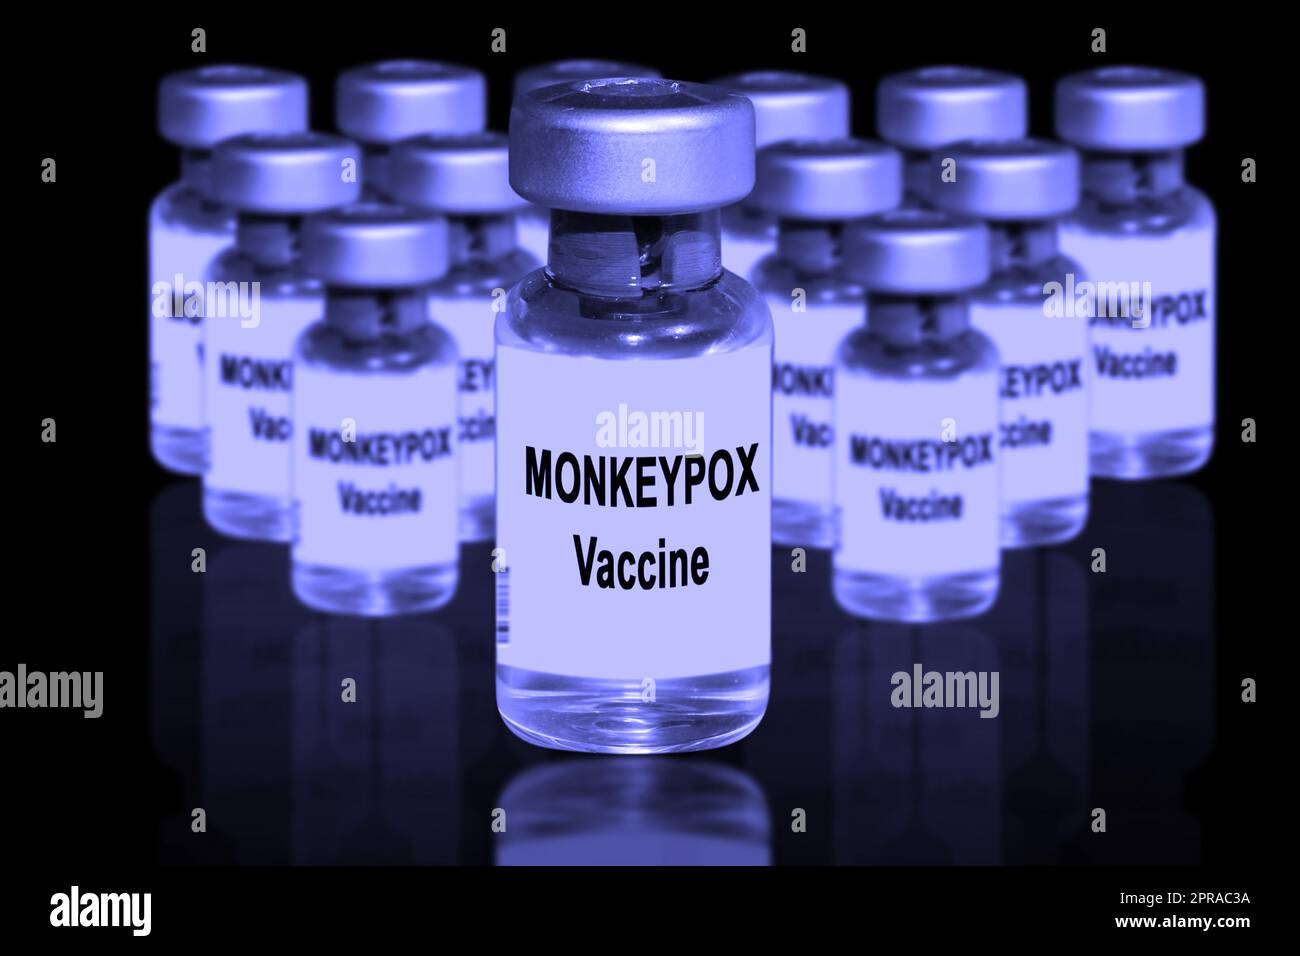 Monkeypox vaccine close-up on a black mirror background. In the background are blurred vaccine vials Stock Photo